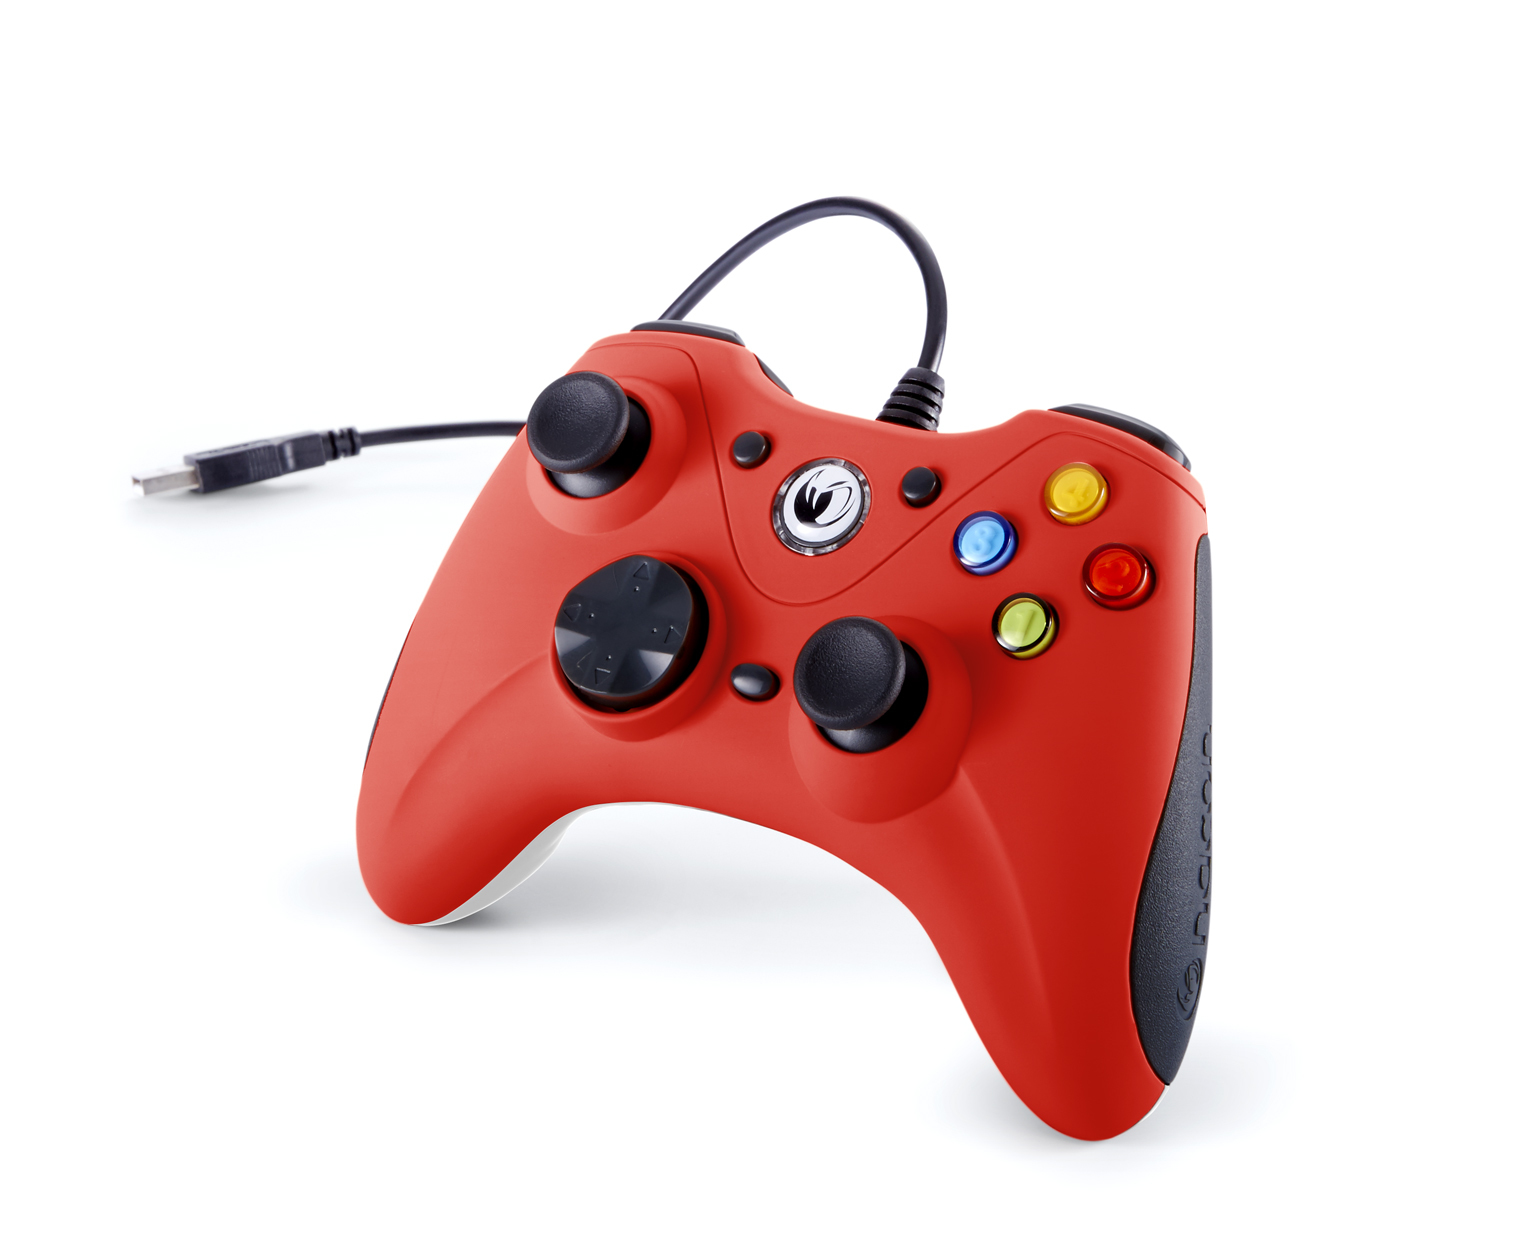 Gamepad Nacon PC Game Controller (Red) PCGC-100 RED - USB Type-A